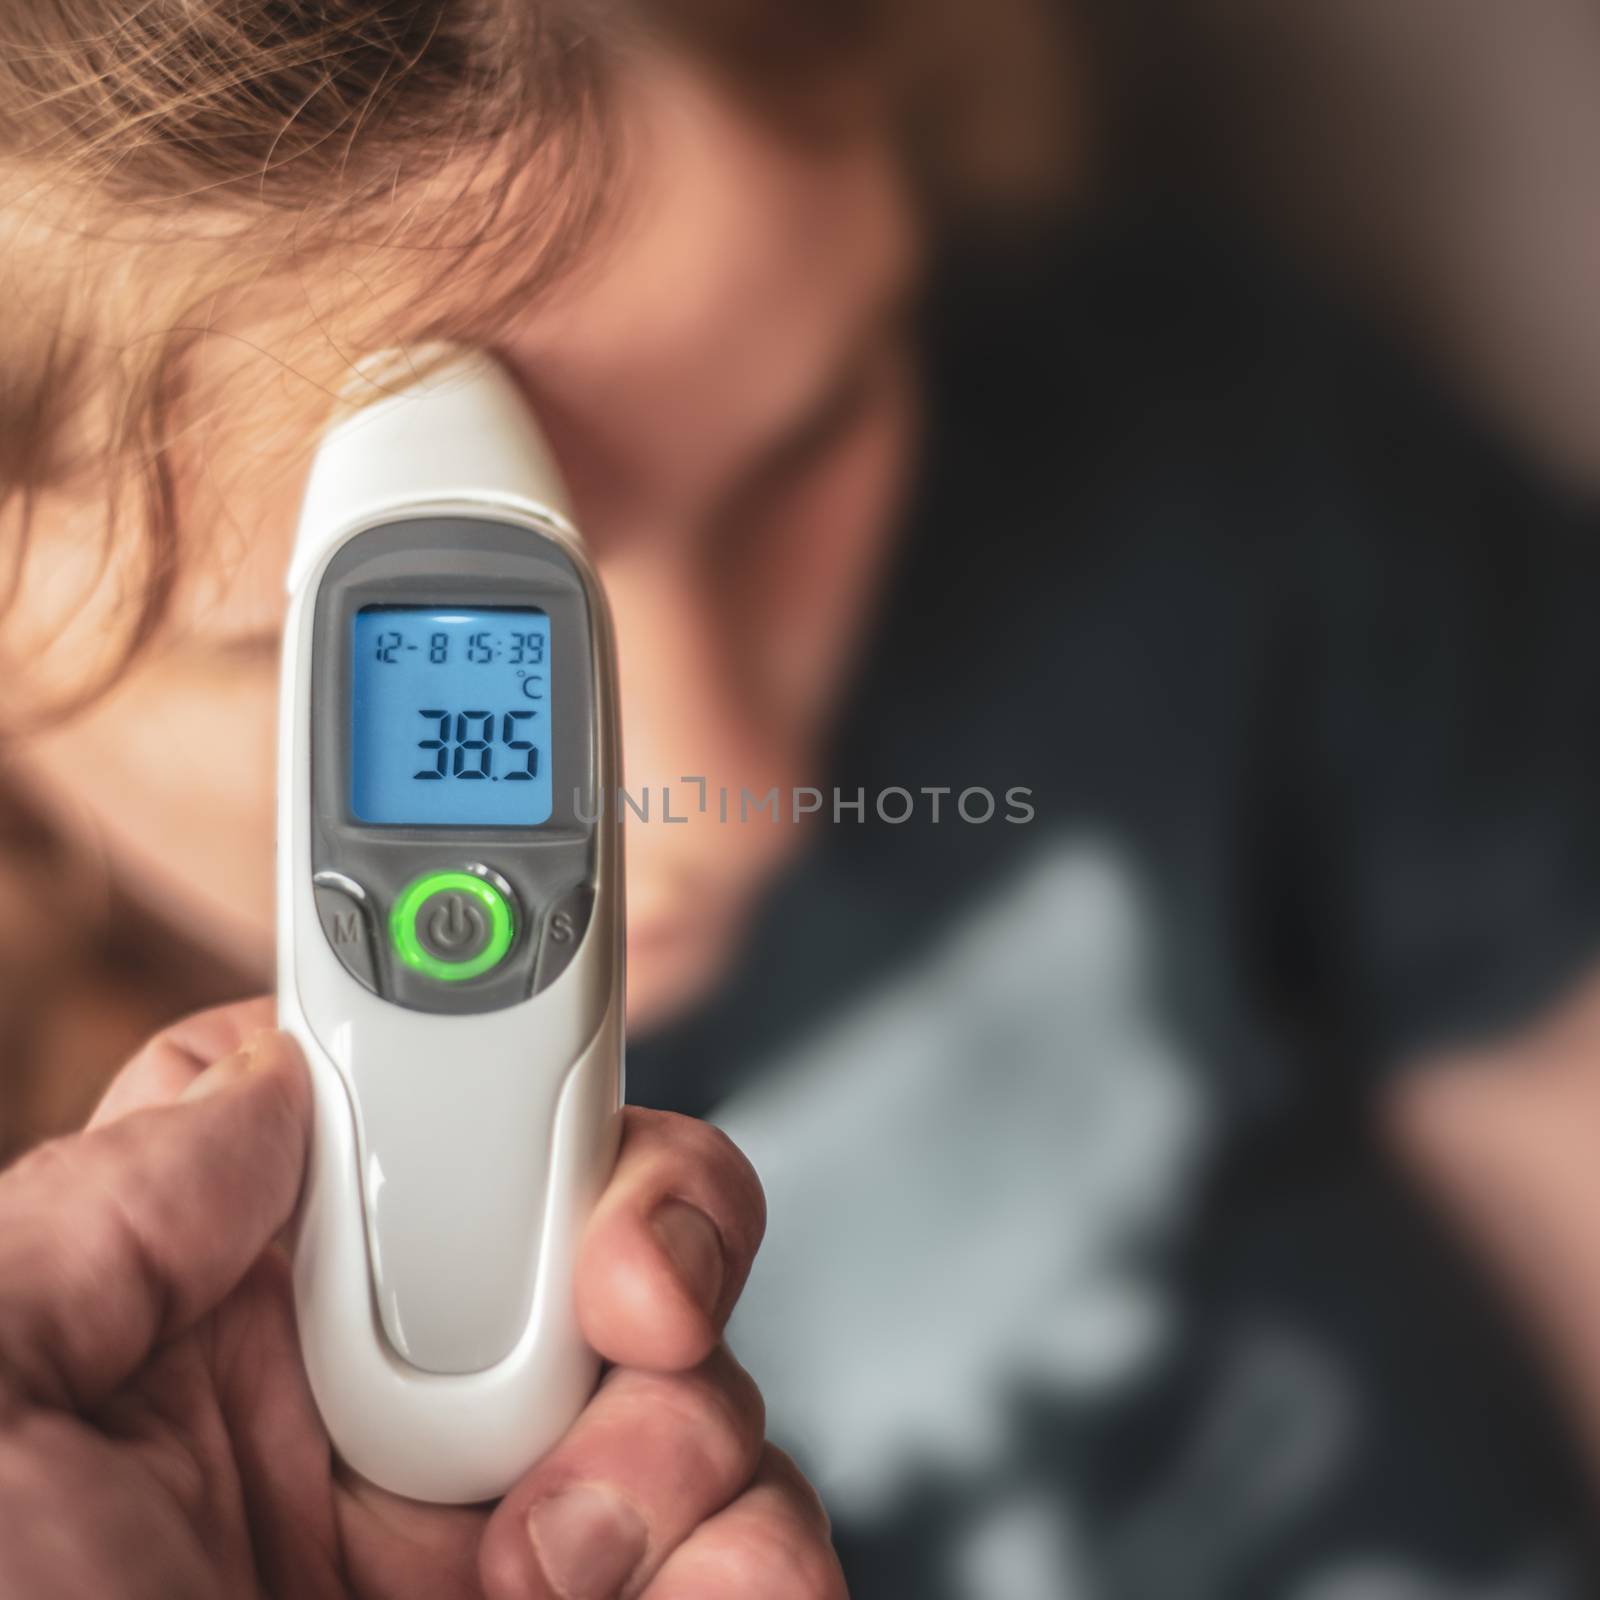 A Parent Using A Digital Thermometer To Take A Child's Temperature